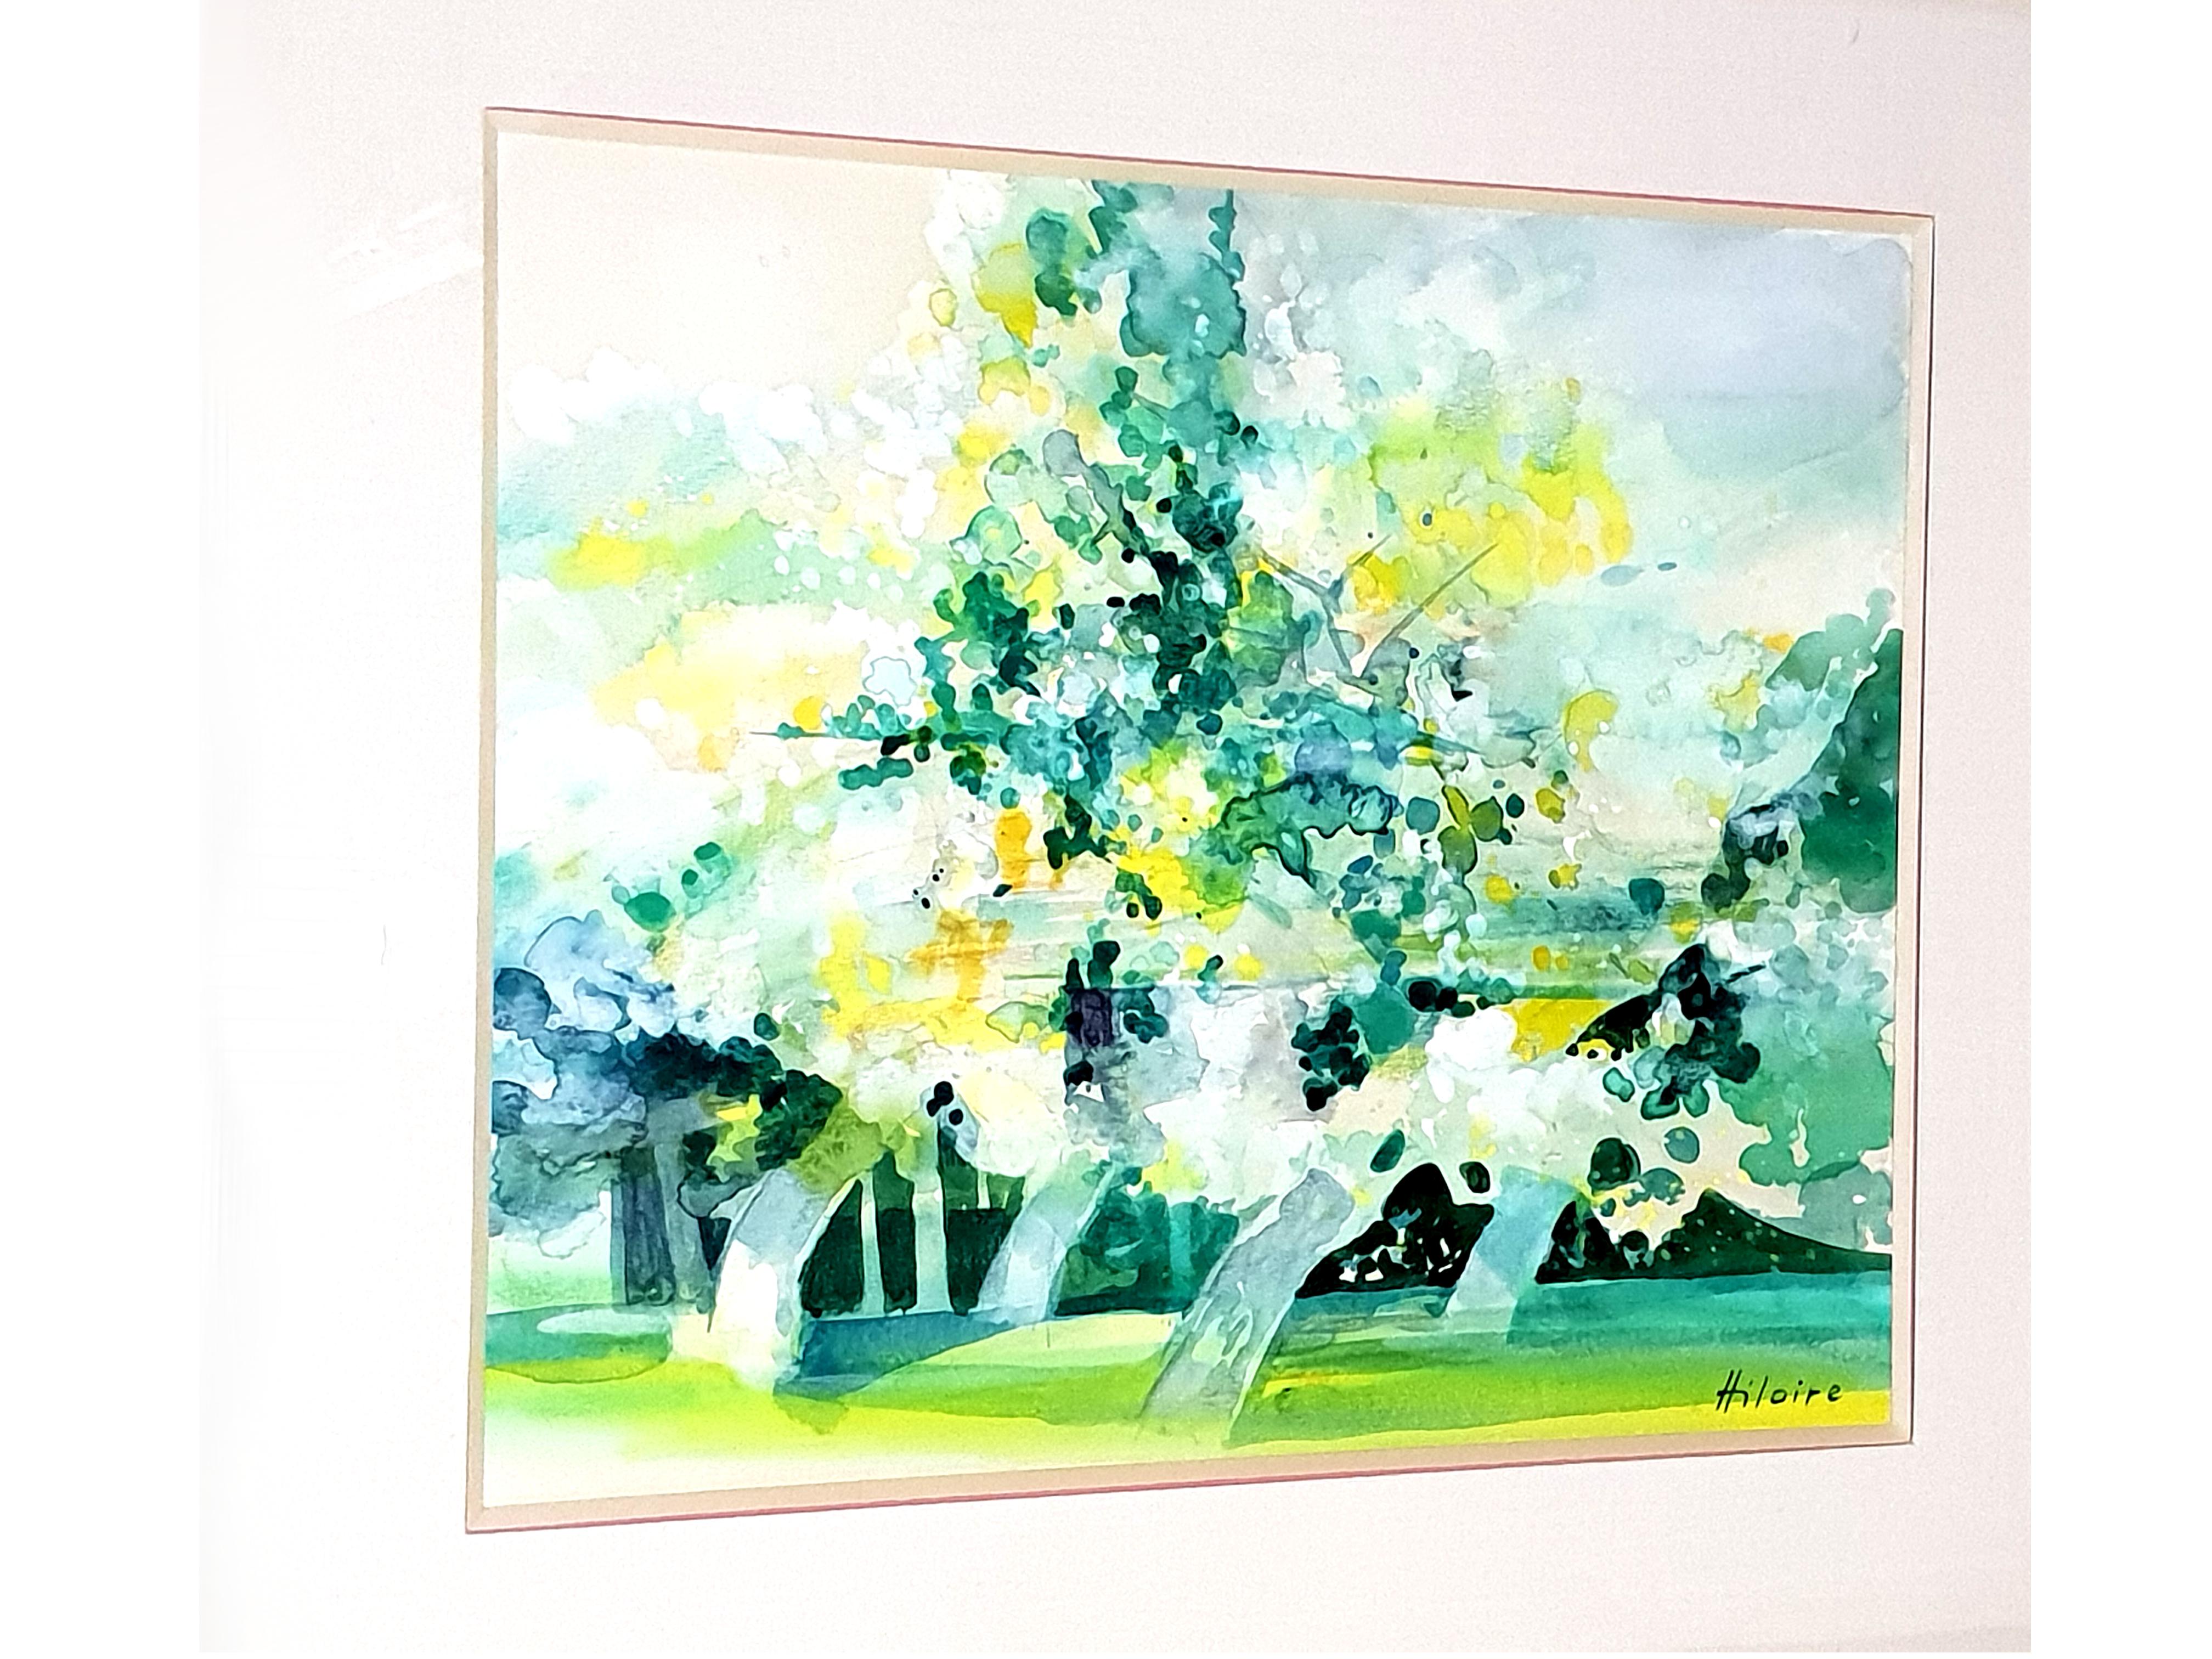 Camille Hilaire (1916-2004)
Green Trees 
Original Signed Watercolor 
43 x 36 cm
Framed

Camille Hilaire
(1916-2004)
 
Camille Hilaire began painting from a young age. At fifteen, he discovered the work of Albrecht Dürer in the Metz city library and